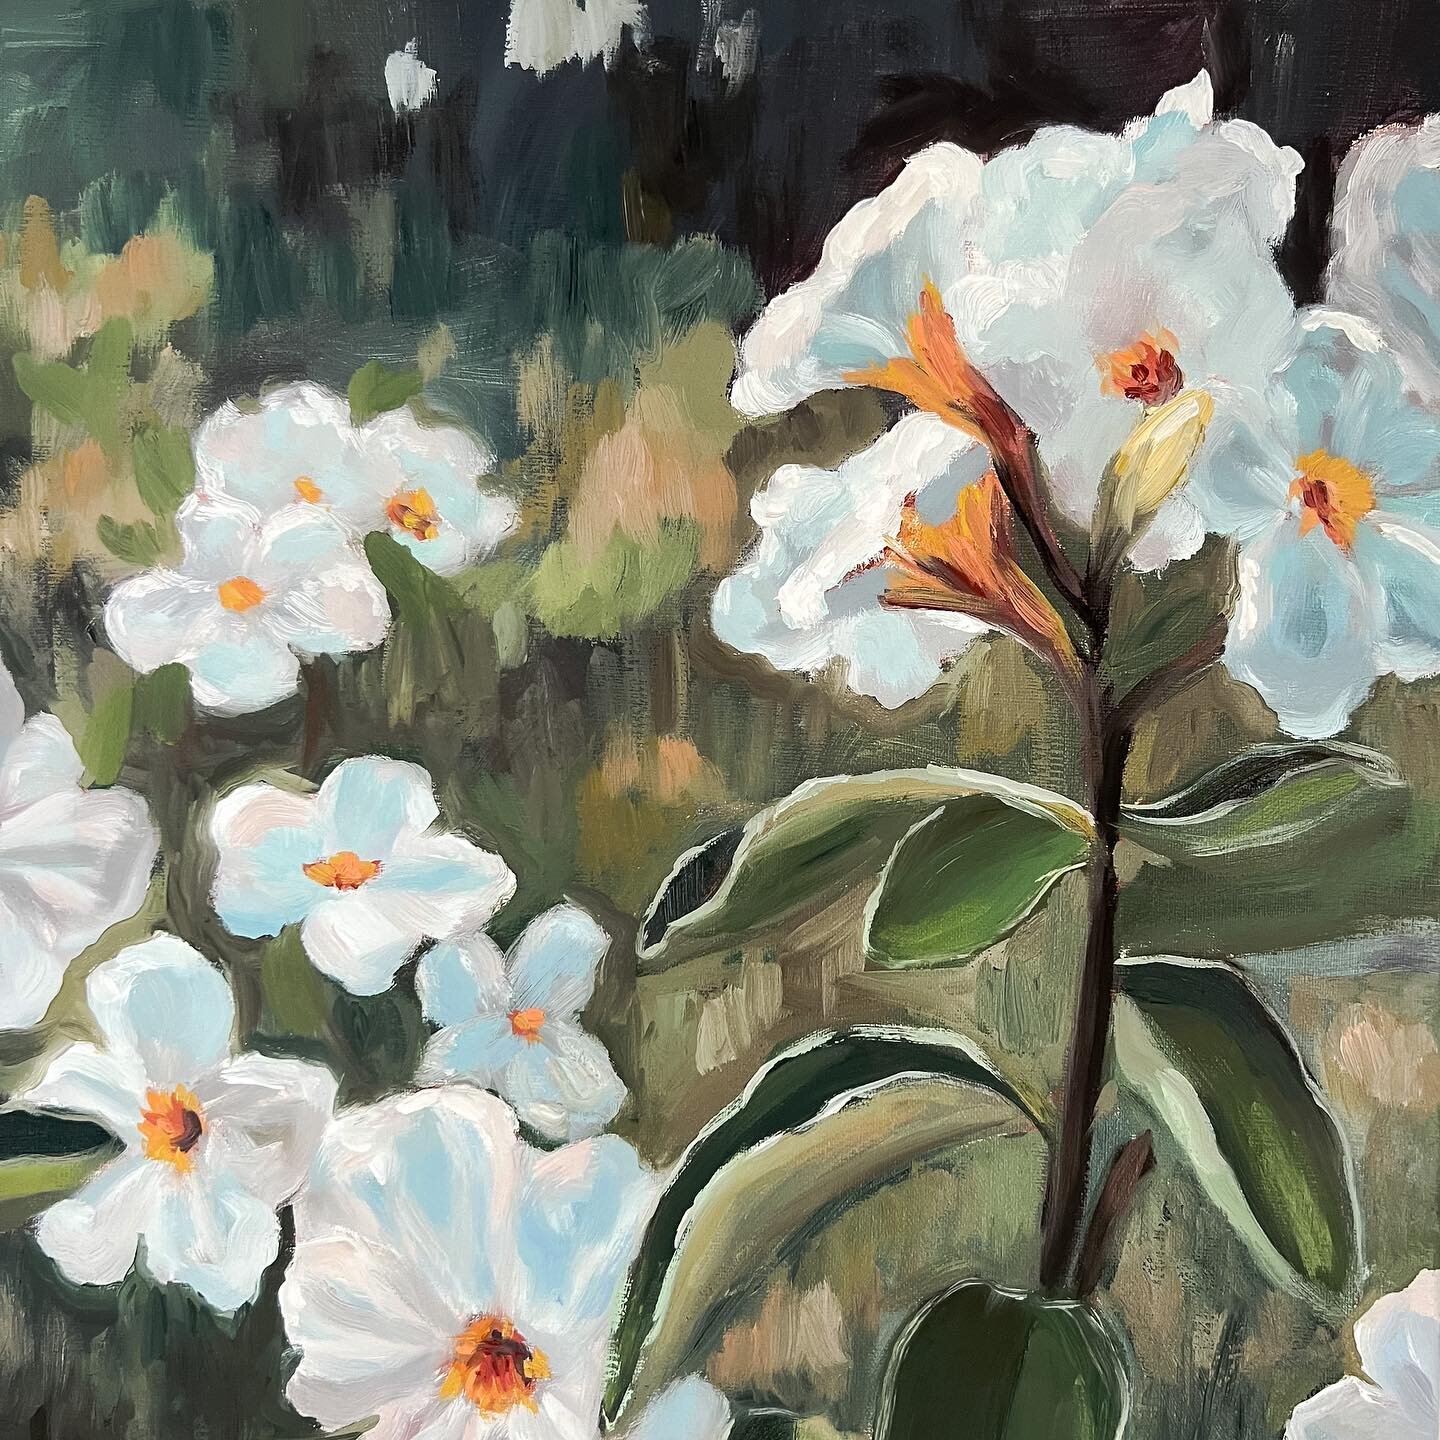 Her Steady Presence was inspired by flowers I saw walking along the eastern shores of #ladybirdlake in Austin this spring. Painting white flowers was an adventure for me since they're anything but white. There's nothing like working through a challen